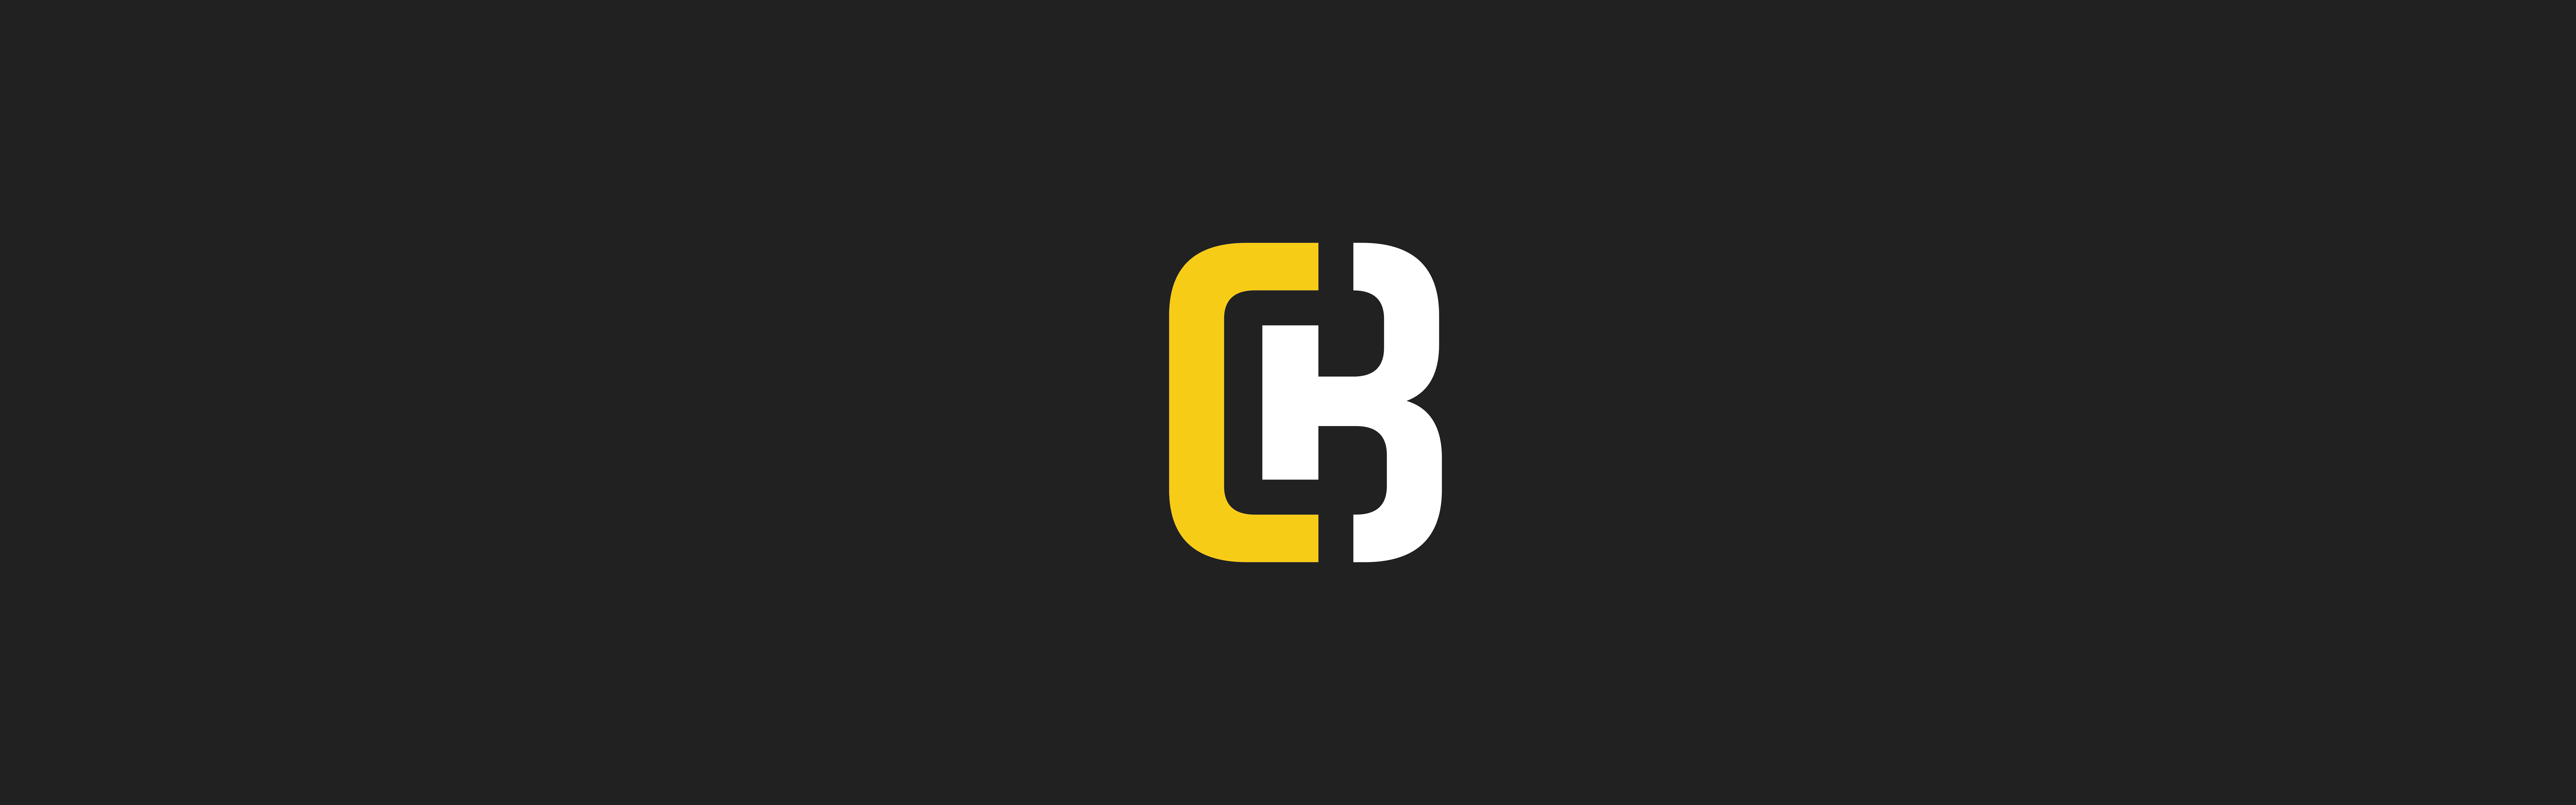 This image displays a graphic logo with a stylized letter 'b' in yellow and white, set against a black background, illuminated by bright lighting.